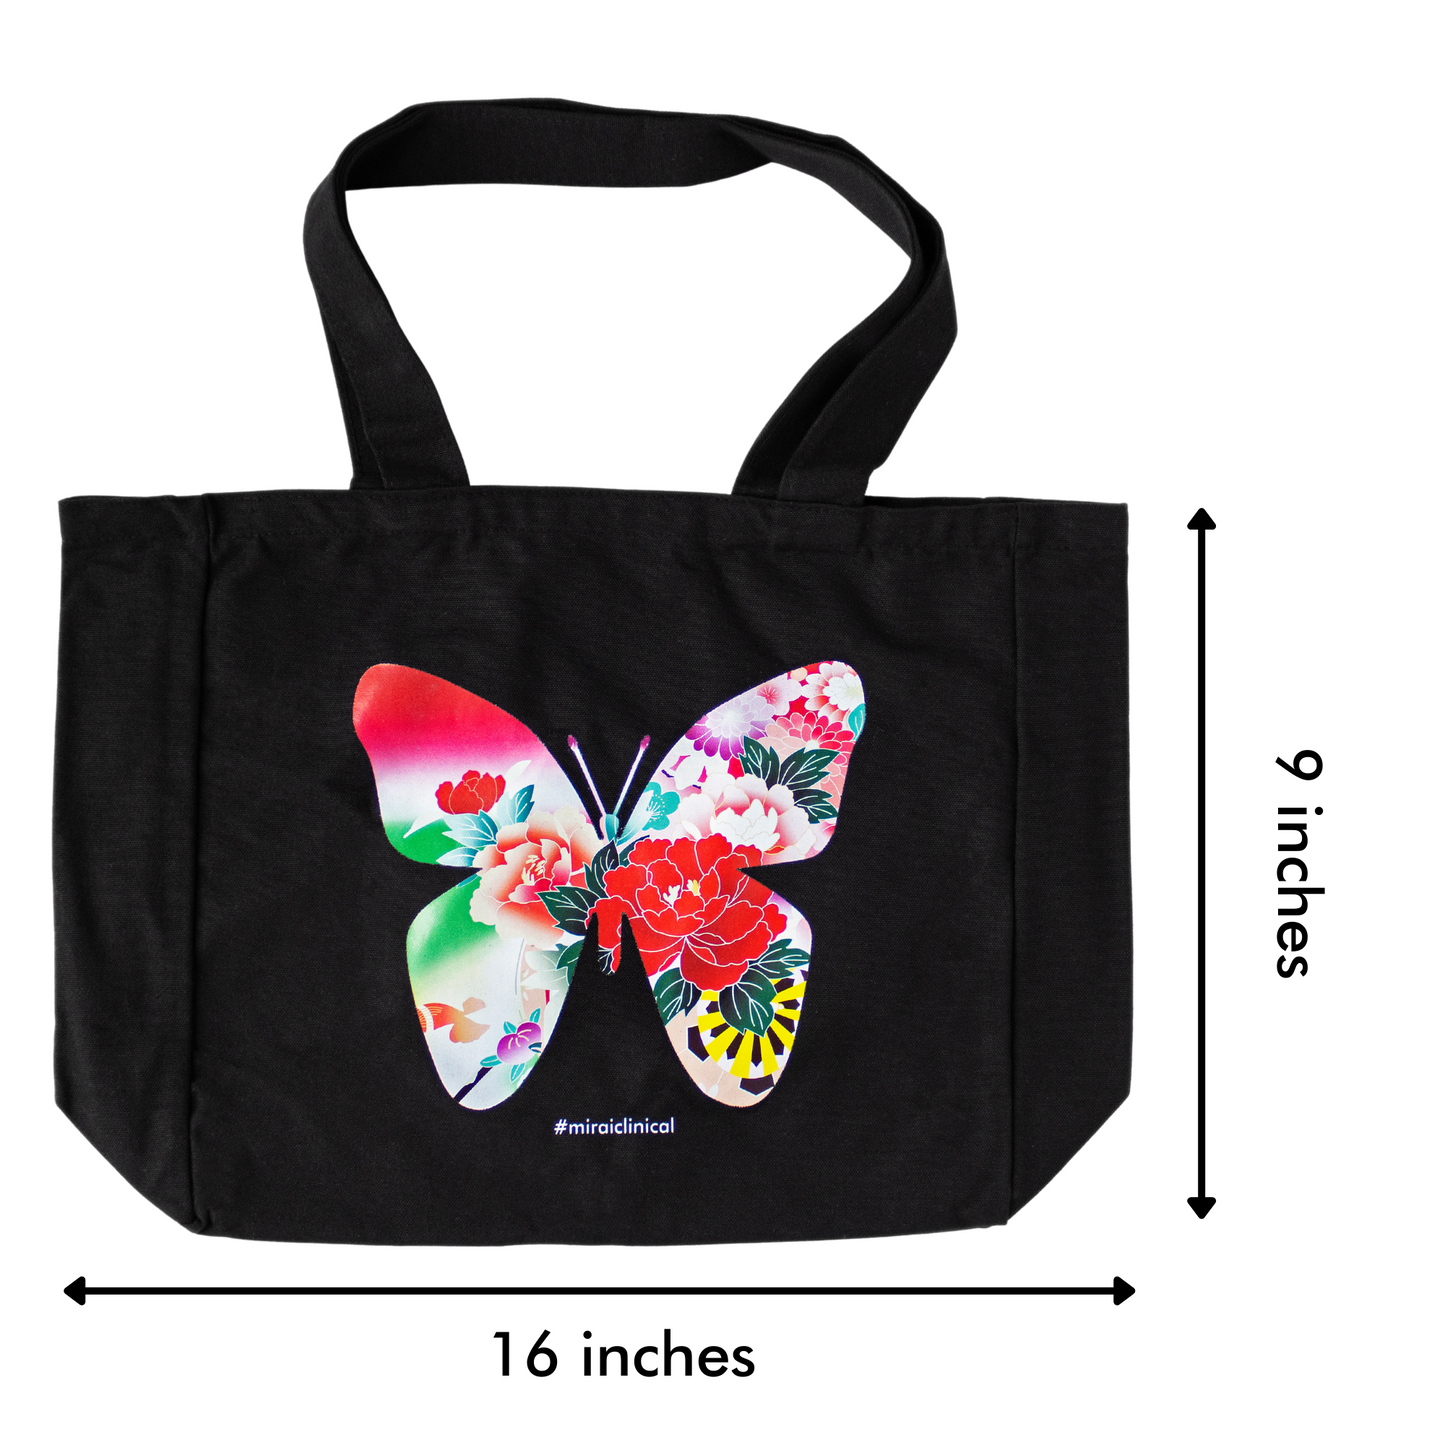 Mirai Clinical Tote Bag with Dimensions. 